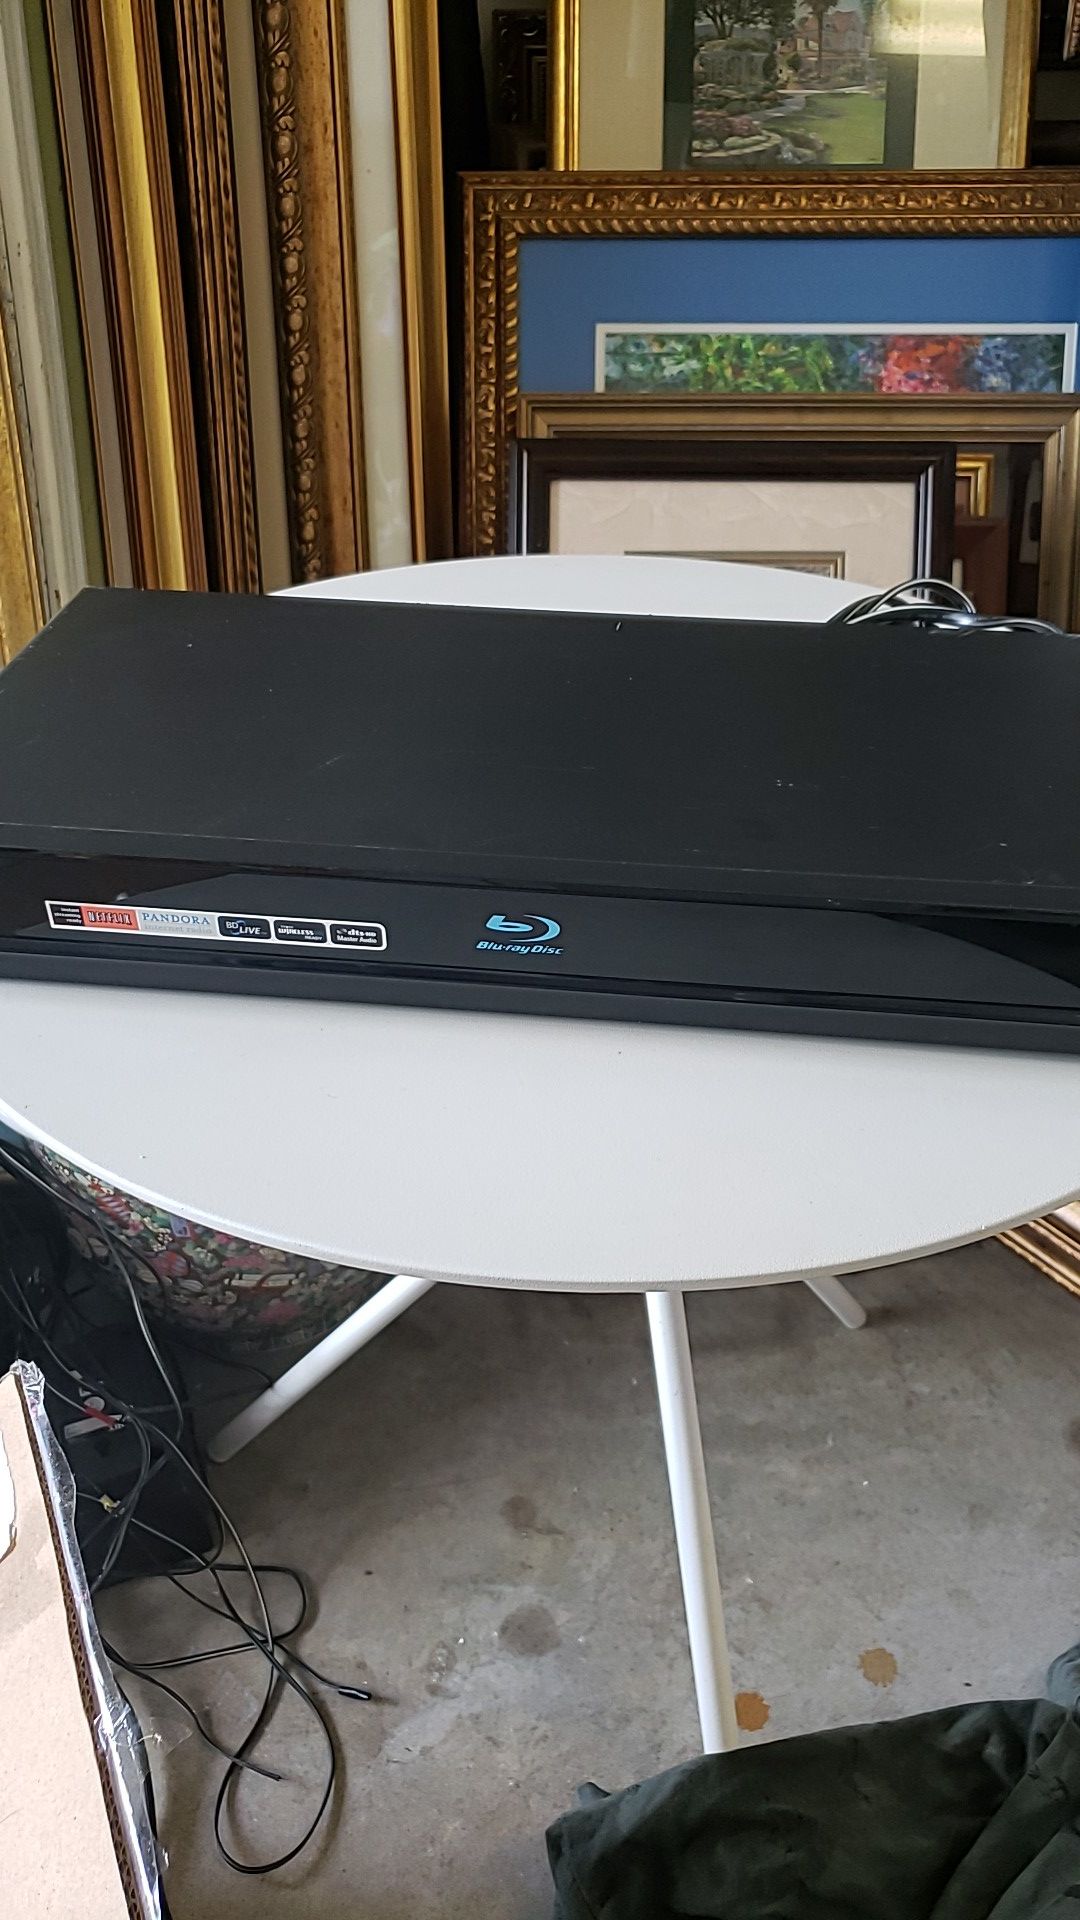 Blue ray dvd player no remote